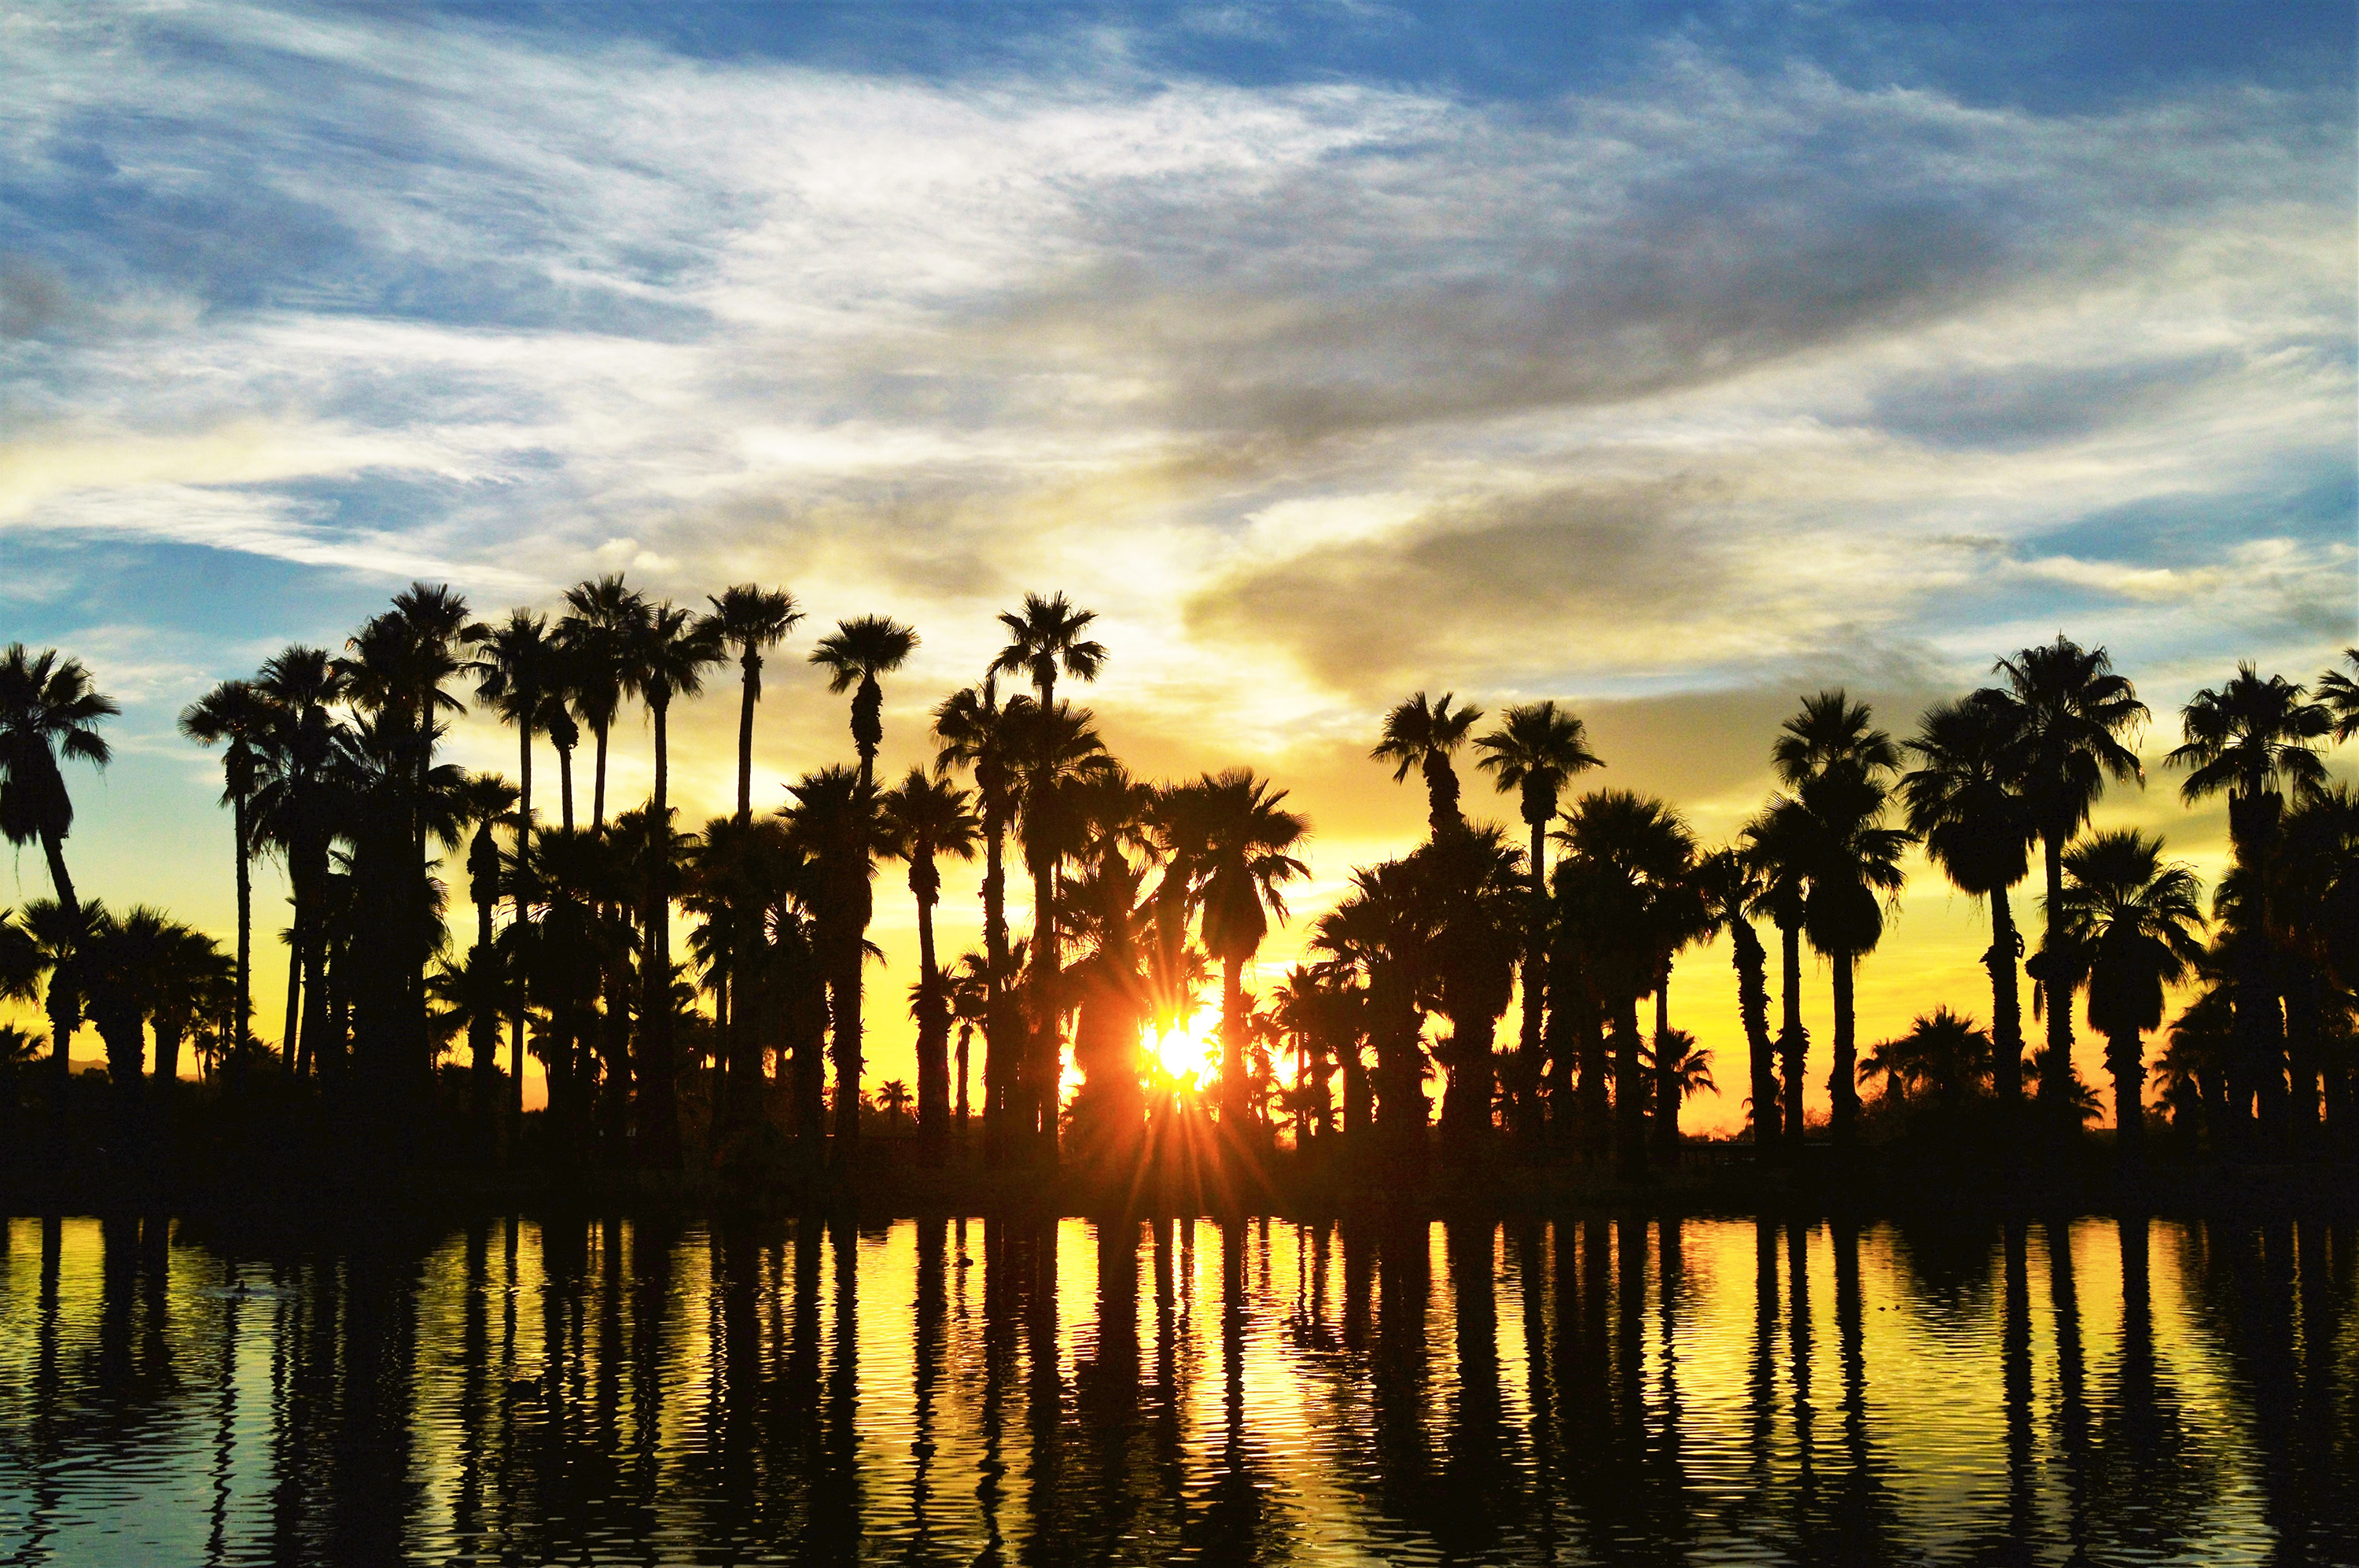 Photo by Jerry Bombardier  |  A warm sunset shines through silhouetted palm trees.